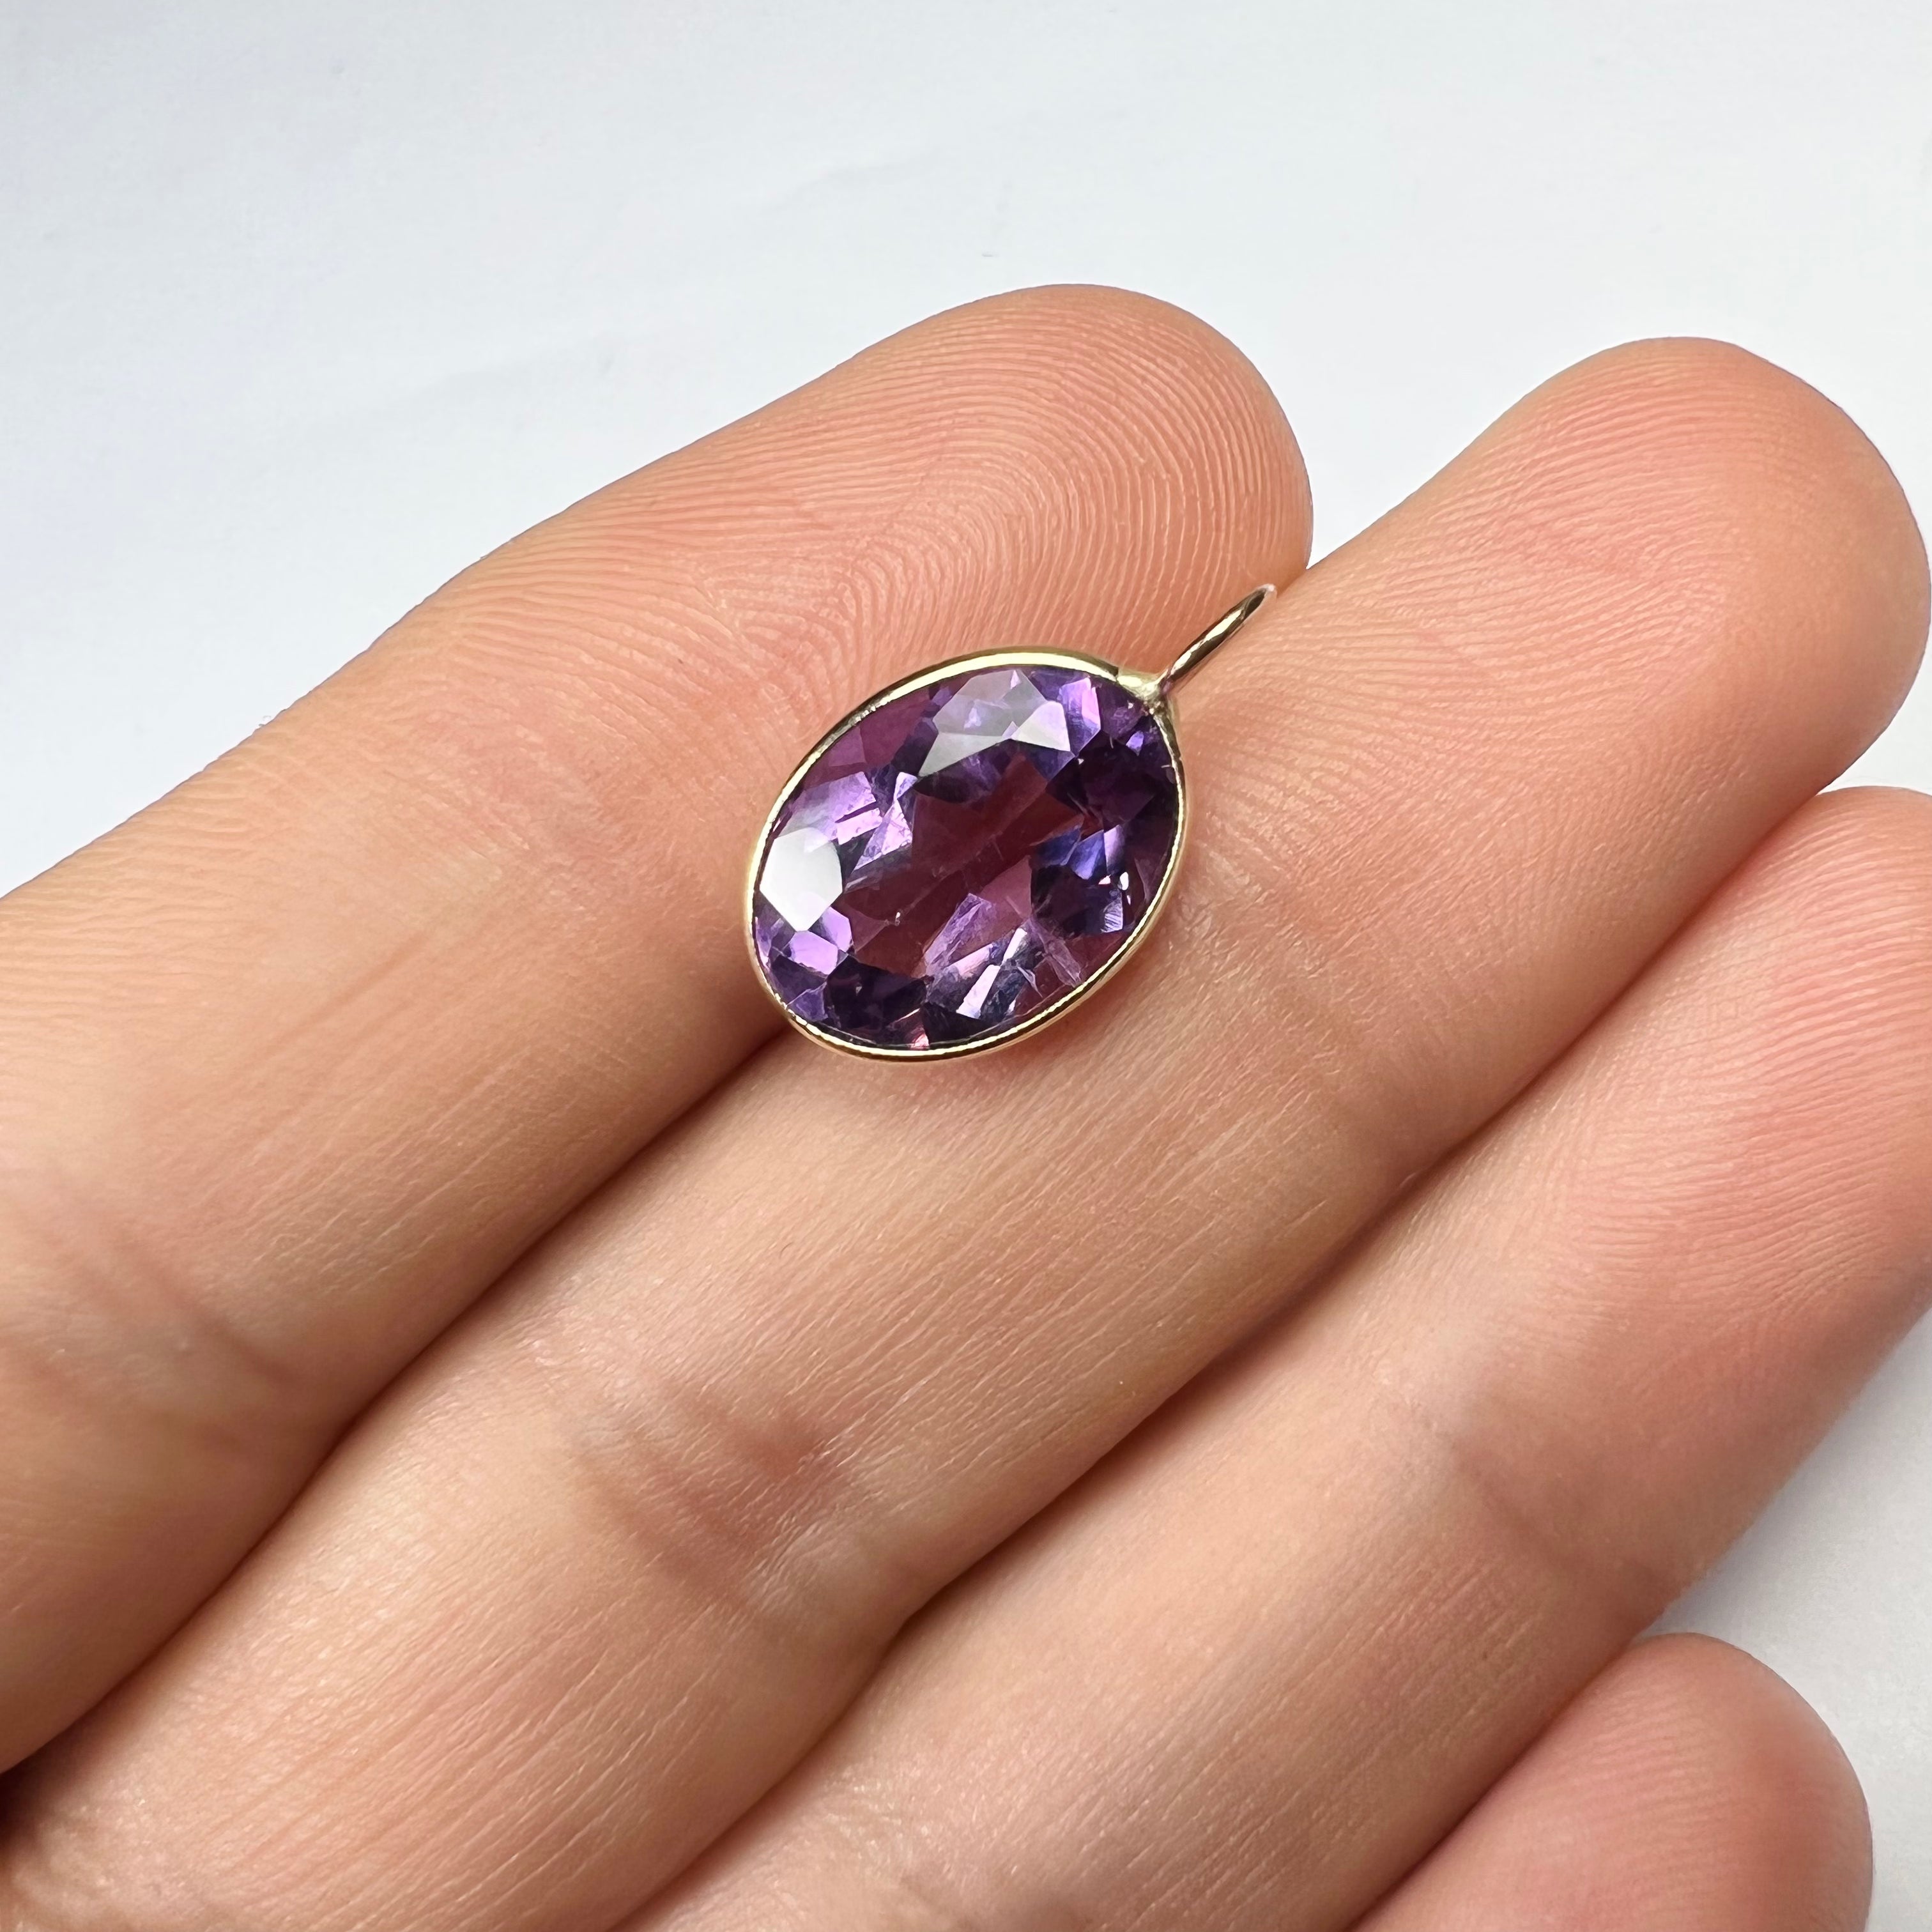 4.27CT Natural Oval Violet Amethyst 14K Yellow Gold Pendant Charm 17x10mm